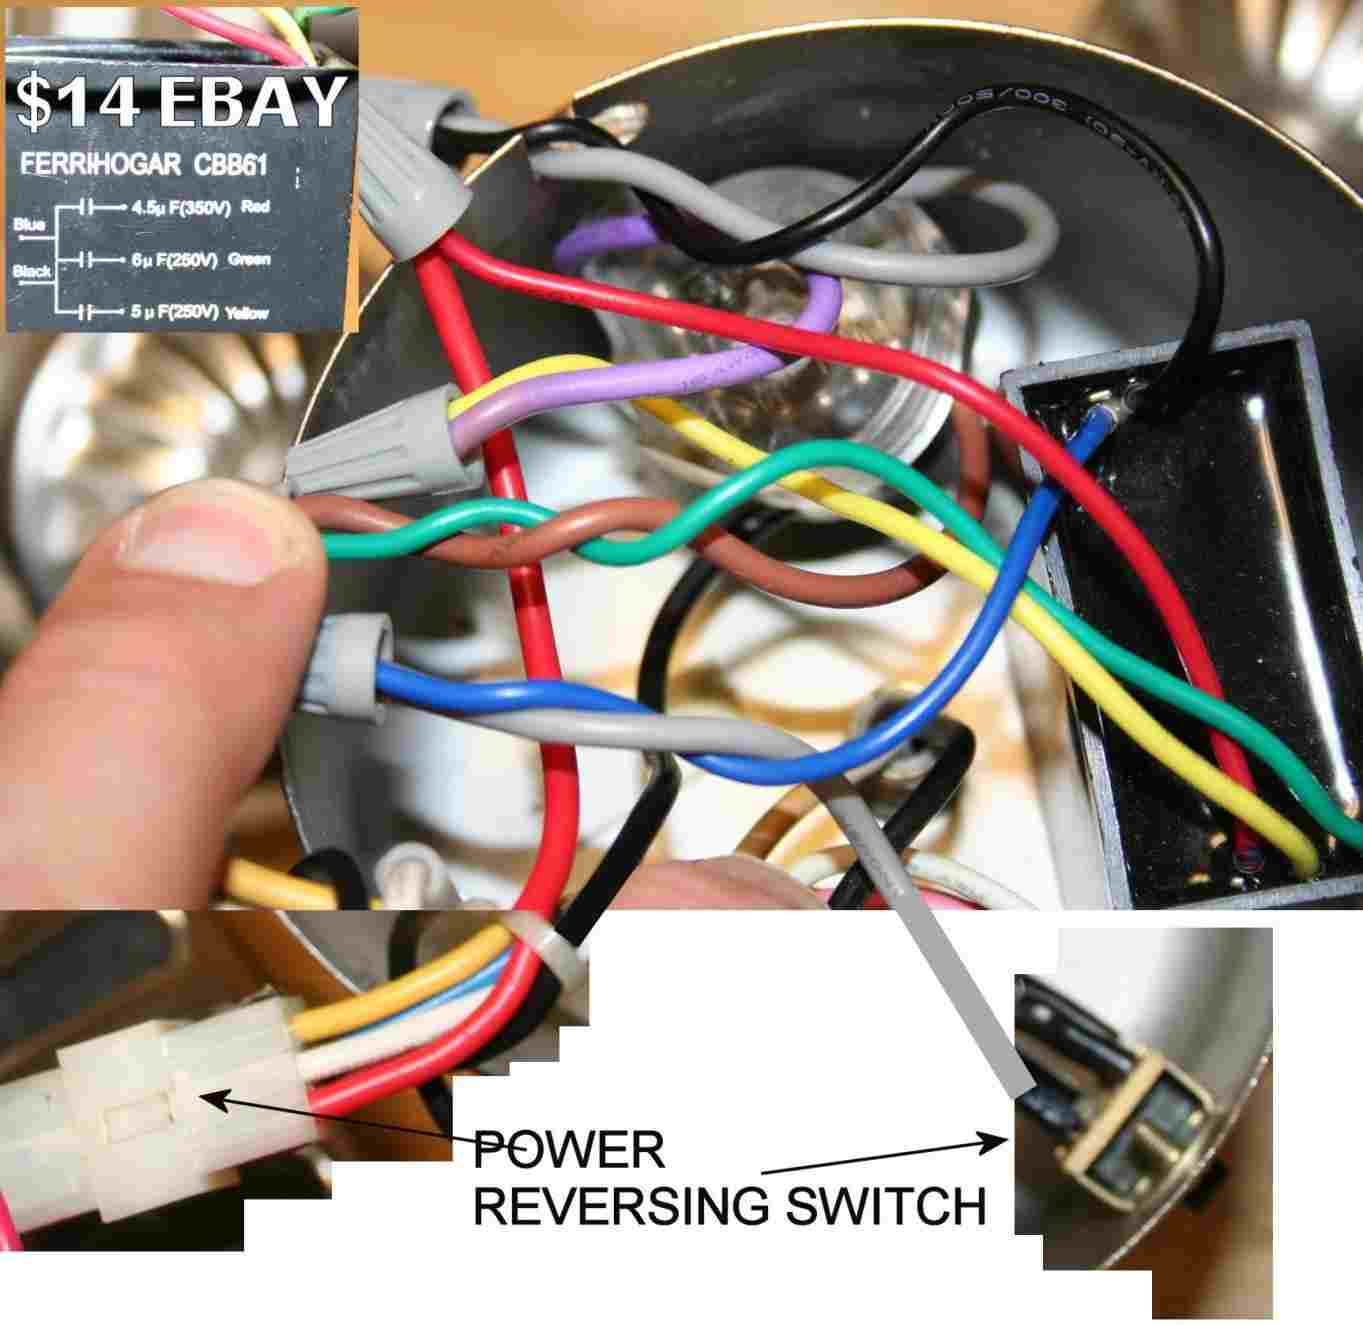 Save-Rhlarchivecom-Wiring-Hunter-Ceiling-Fan-Pull-Chain-Light-Switch - Ceiling Fan Pull Chain Light Switch Wiring Diagram